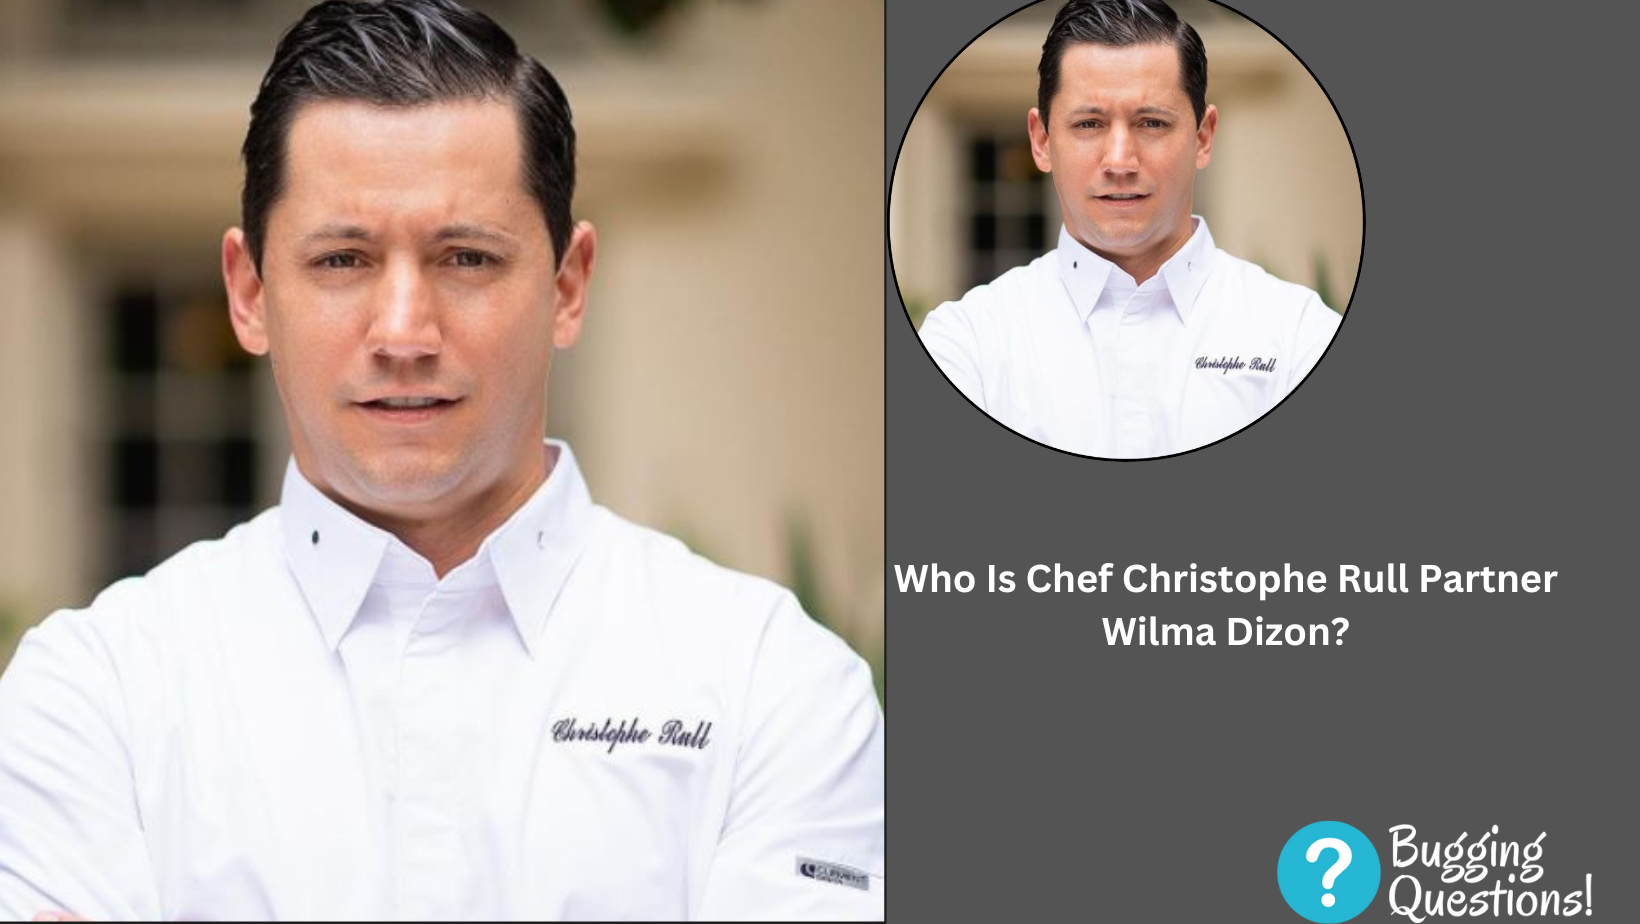 Who Is Chef Christophe Rull Partner Wilma Dizon?